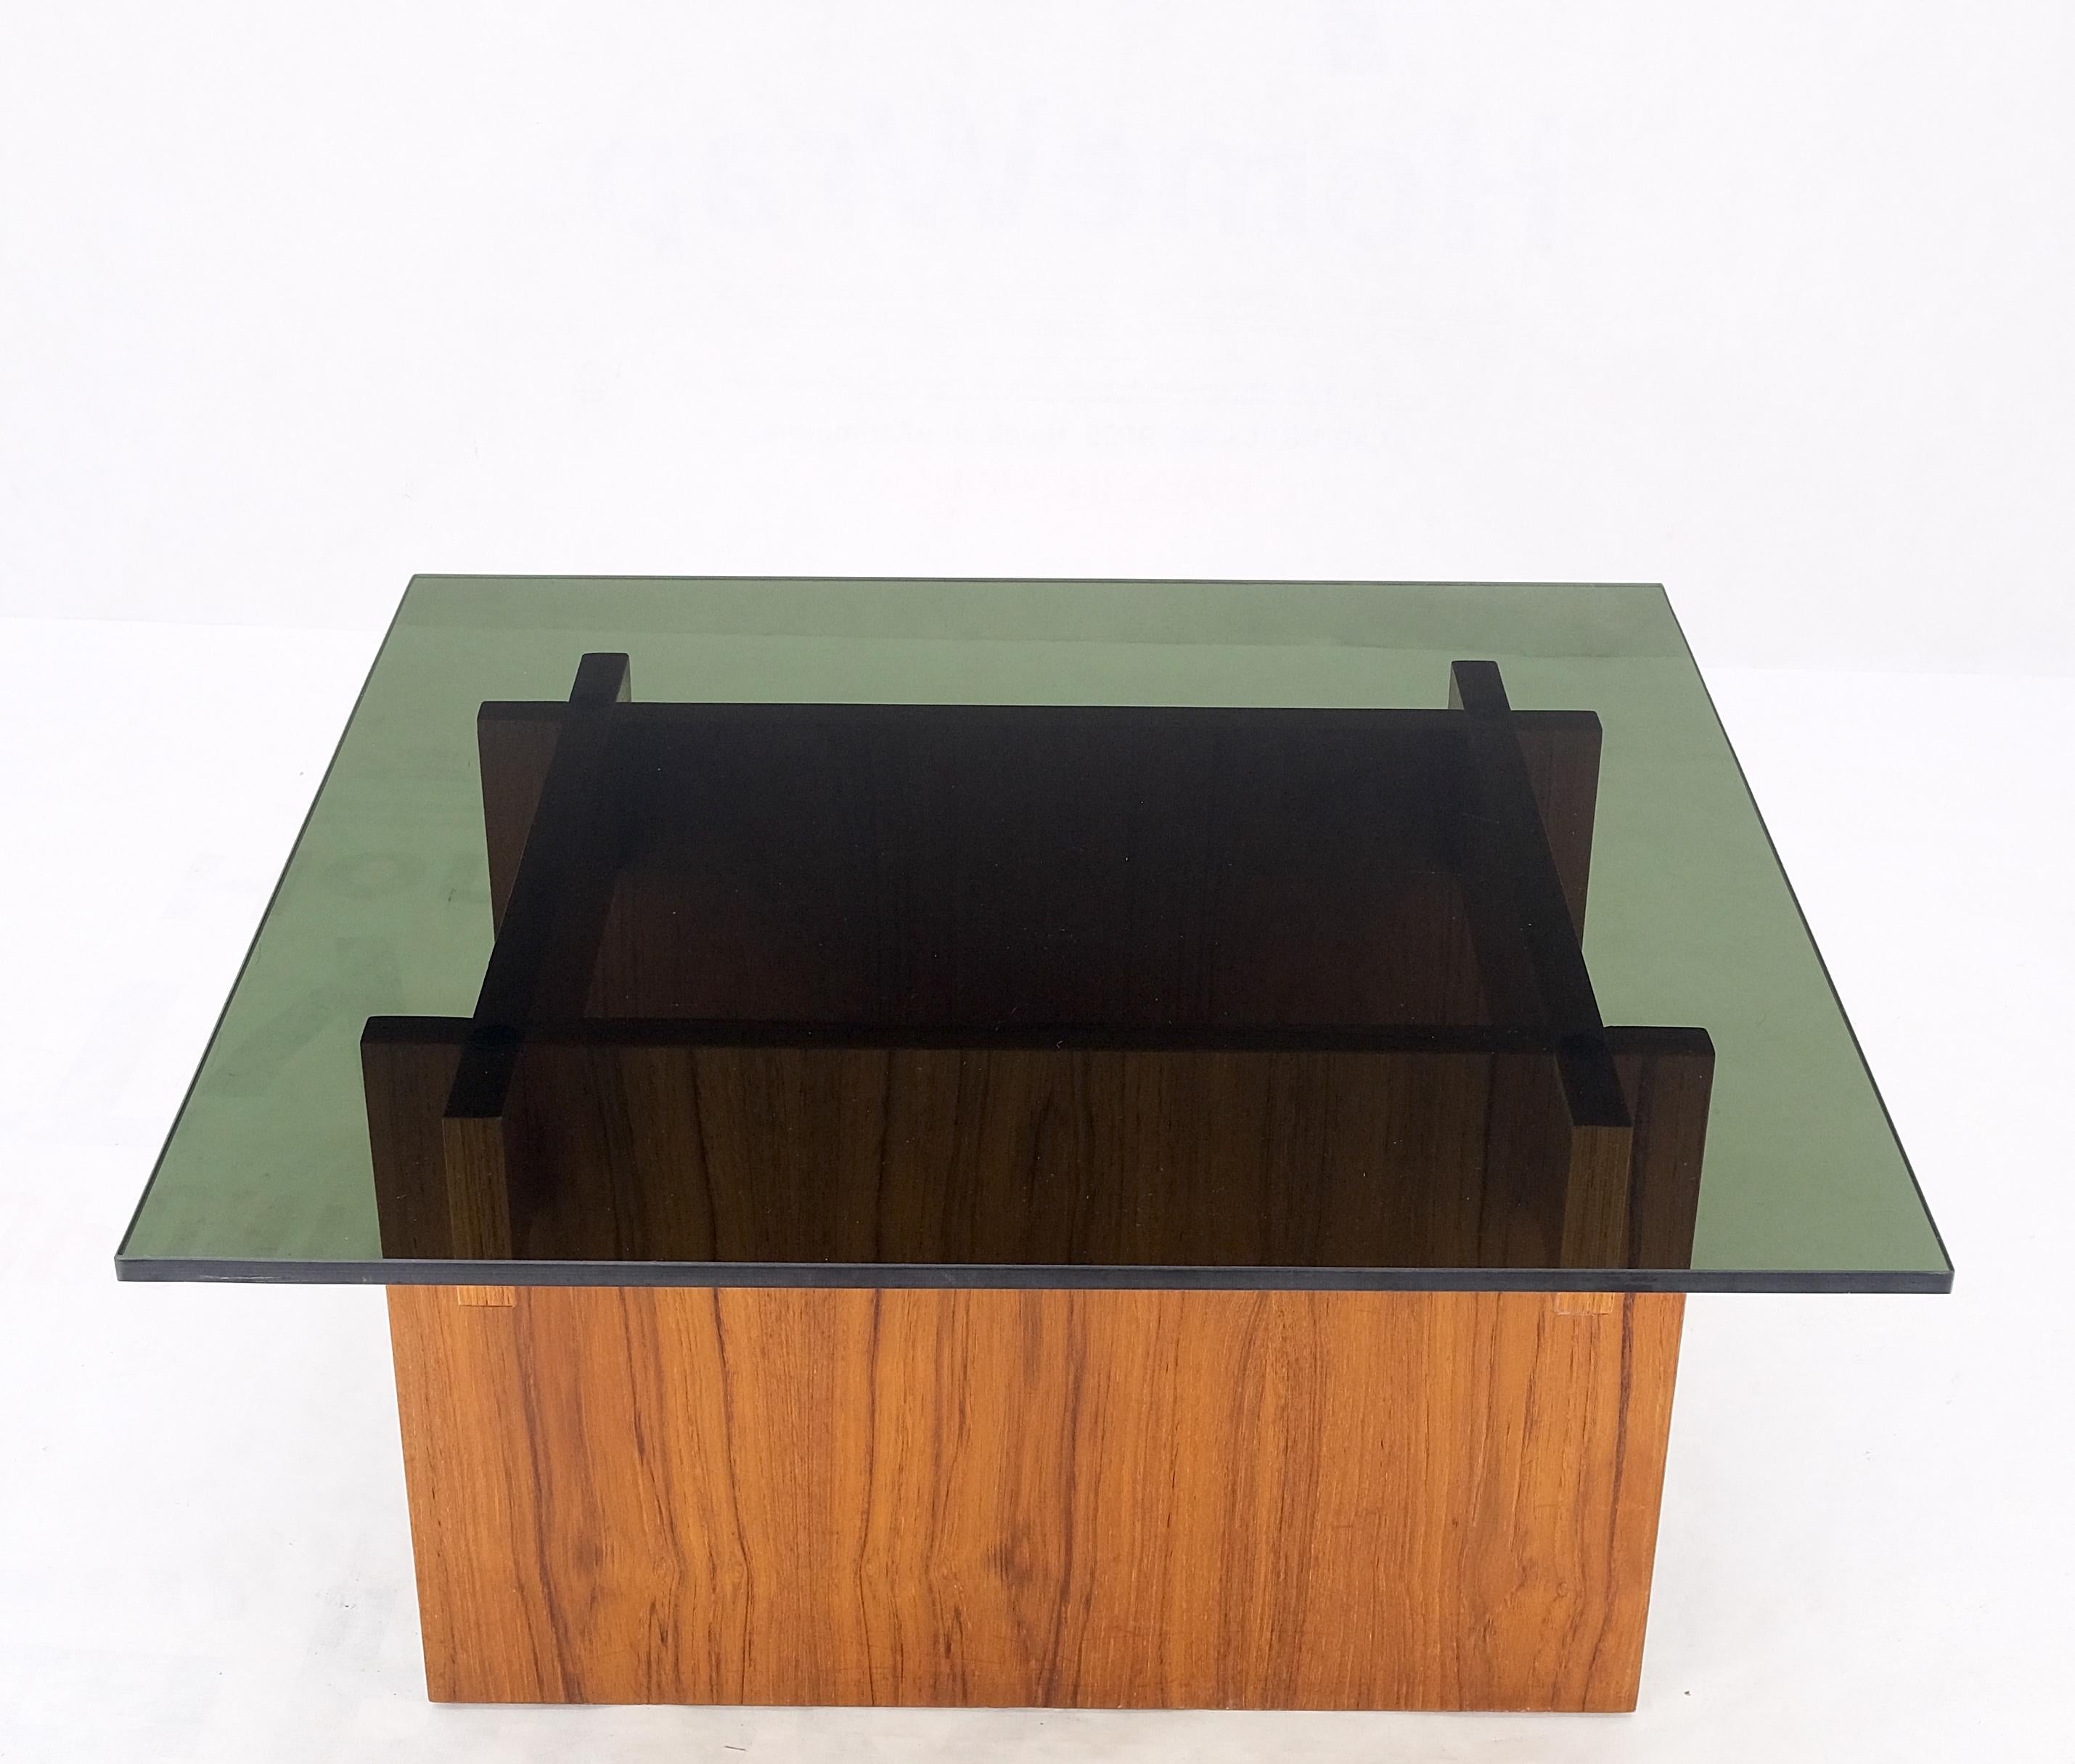 Danish Mid-Century Modern Teak Smoked Glass Square Coffee Table MINT! For Sale 6